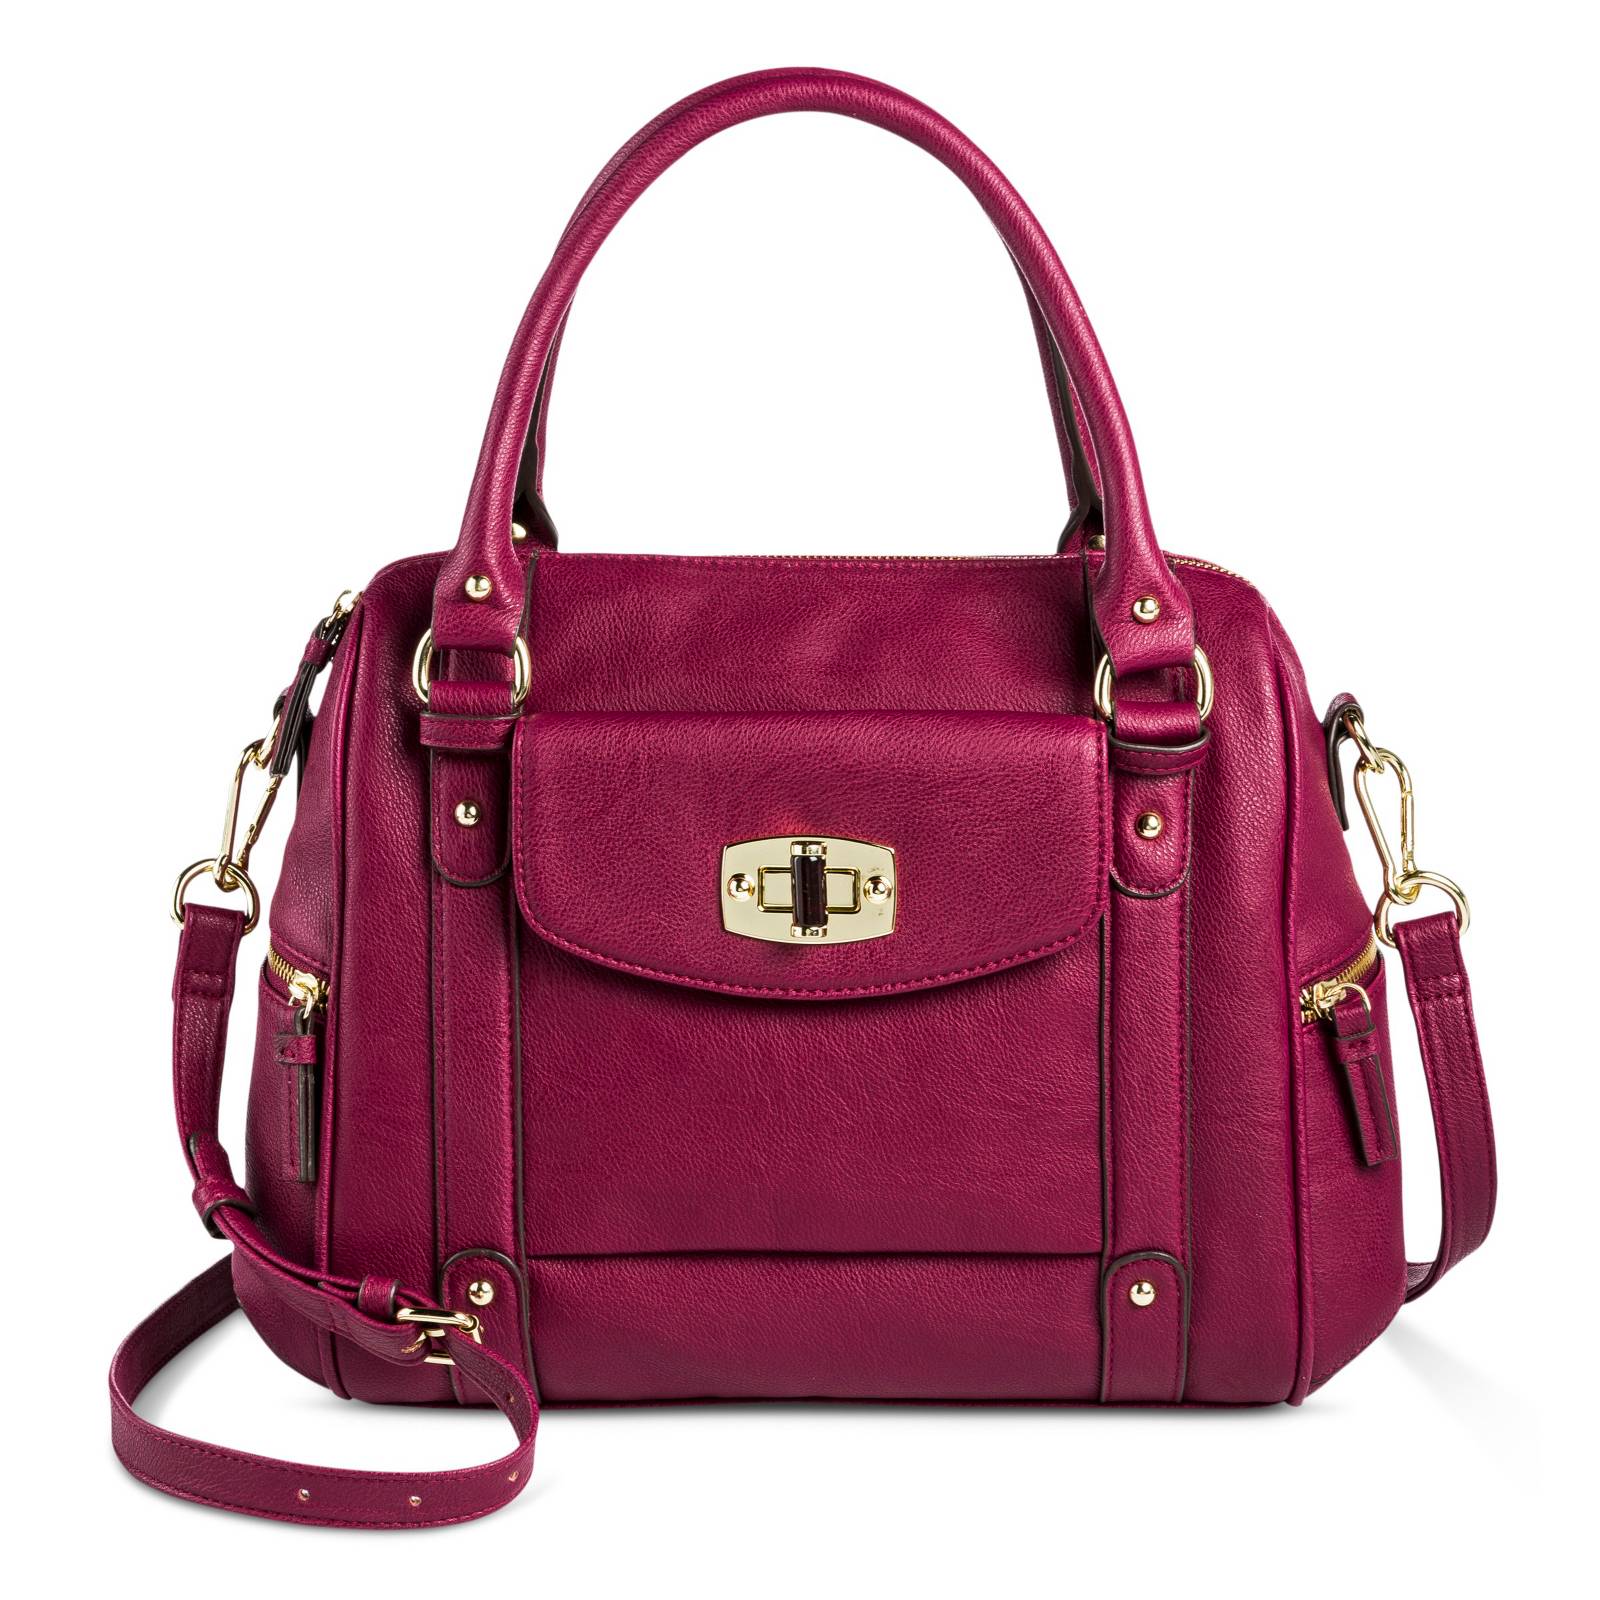 Women's Satchel Faux Leather Handbag with Removable Crossbody Strap ...